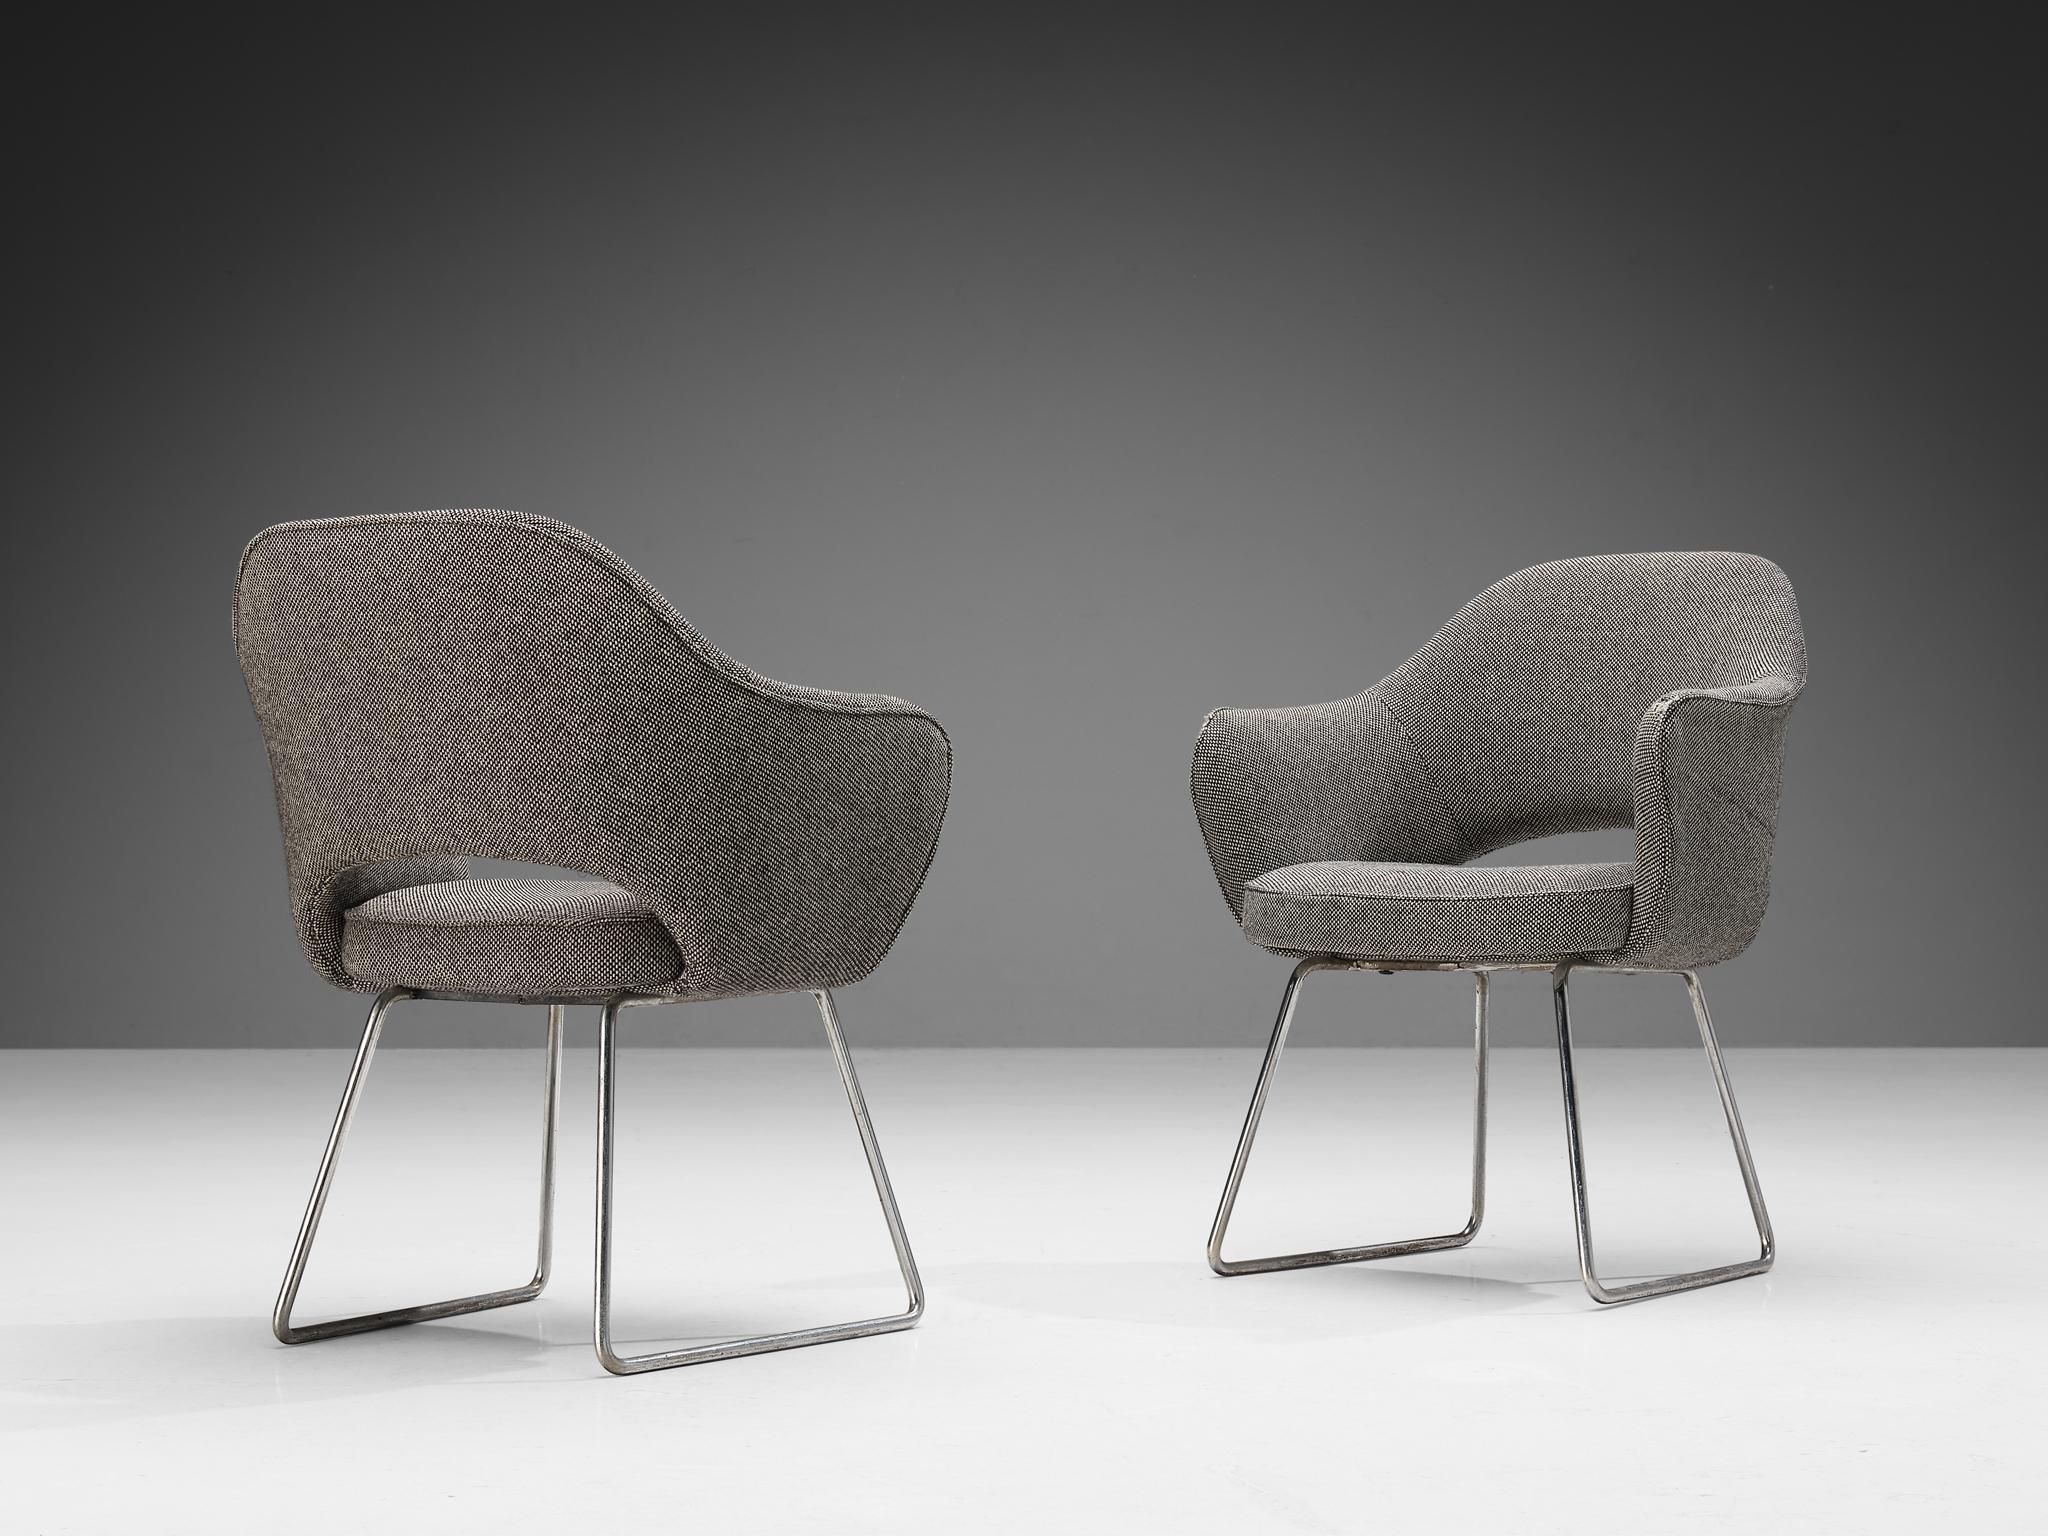 Eero Saarinen for Knoll International, pair of ‘Conference’ armchairs, fabric, chromed metal, France, Paris, designed in 1957

These armchairs were commissioned by the UNESCO Headquarters located in Paris. This iconic building was completed on 3